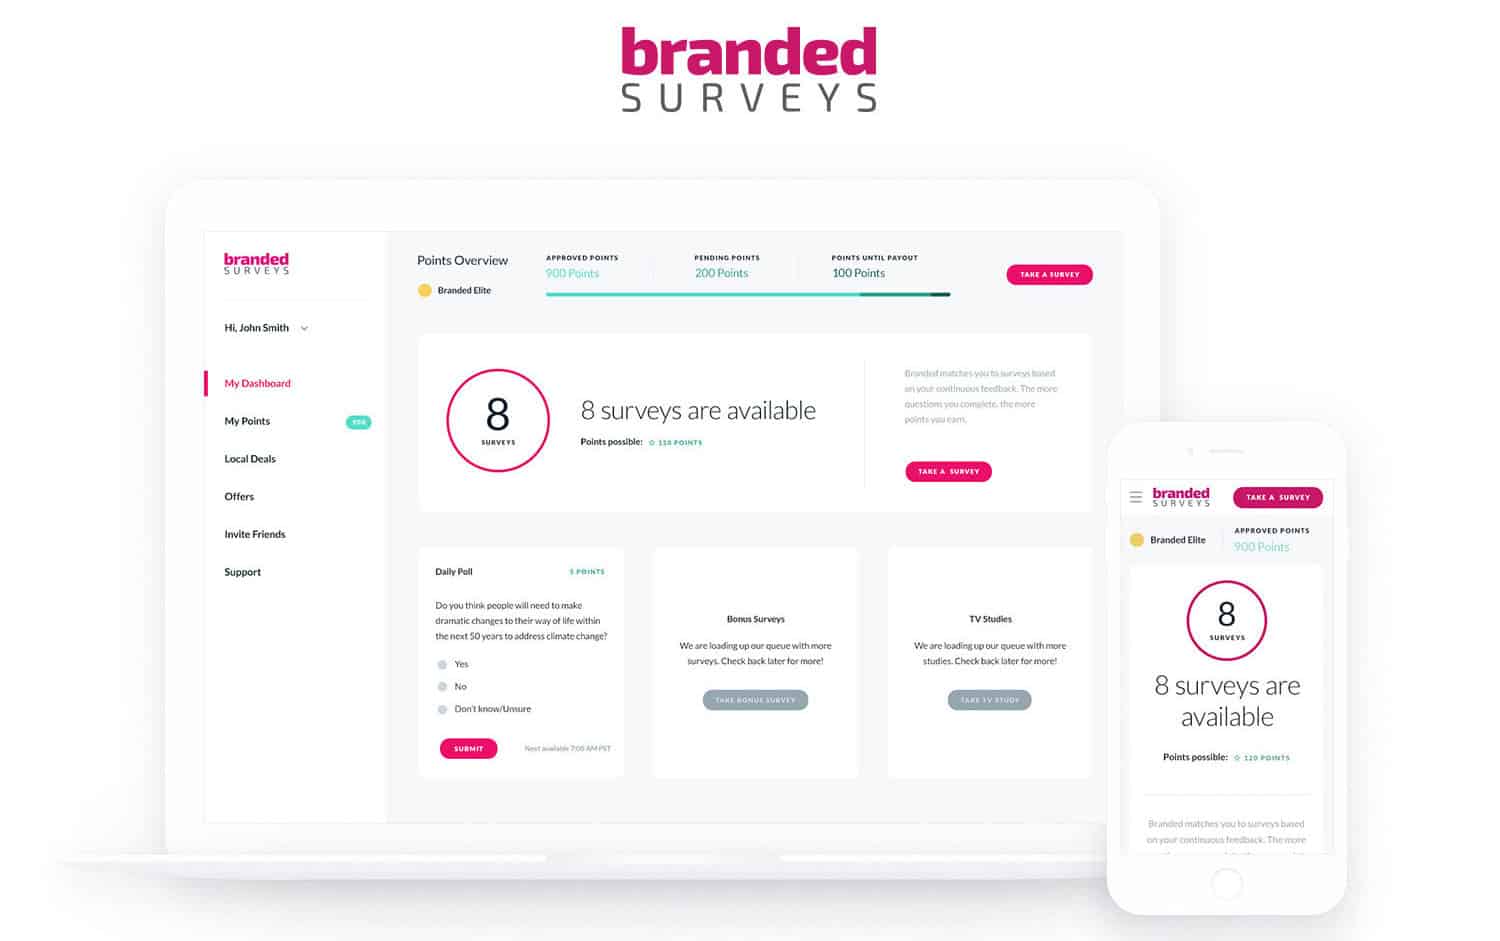 branded surveys enhanced dashboard shows how many paid online surveys are available to member users 